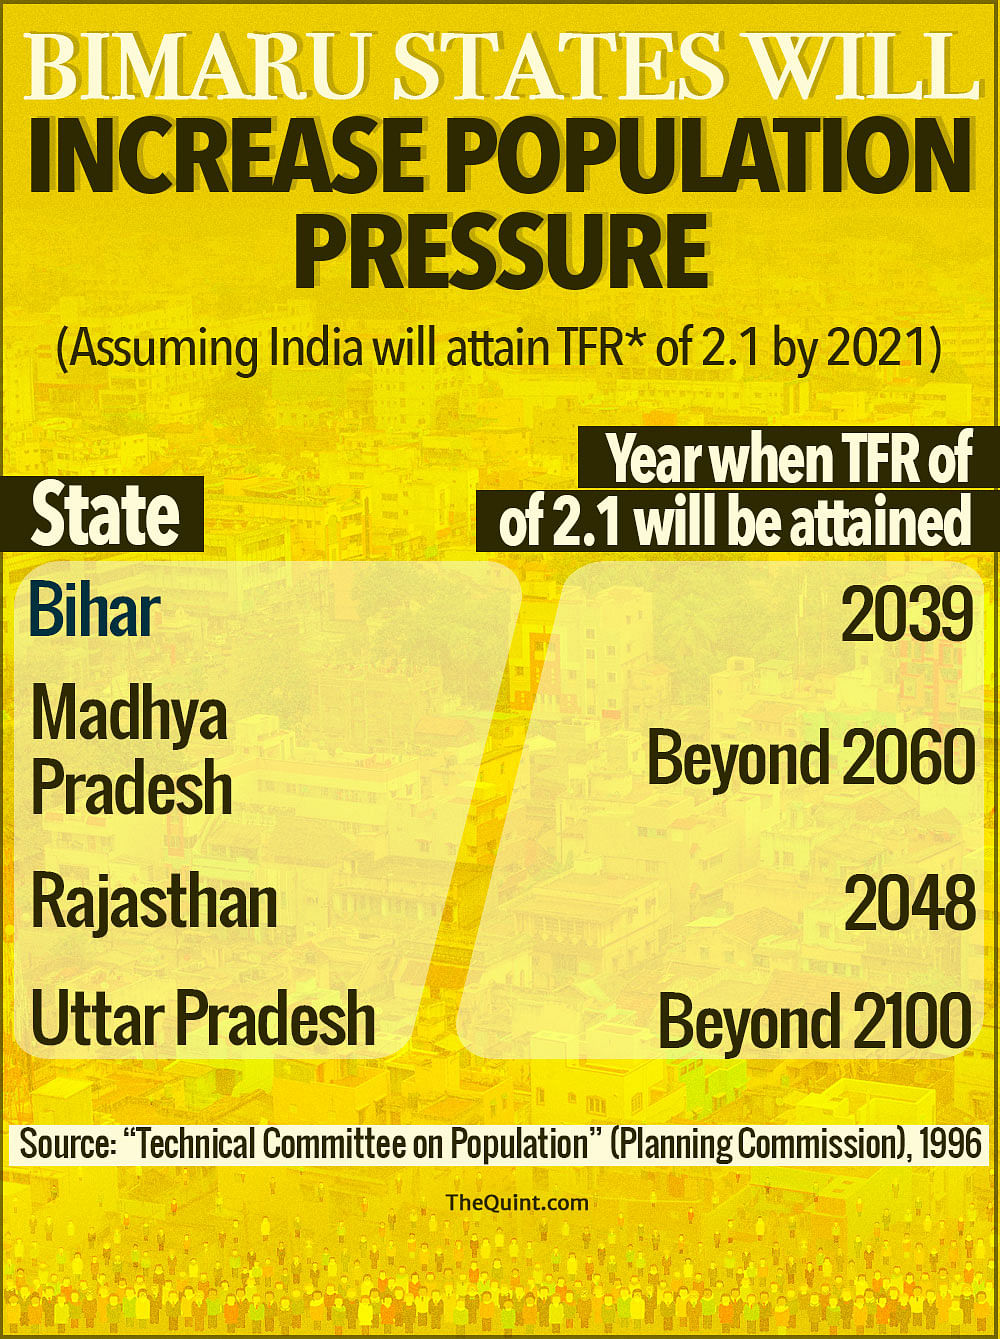 Rapid urbanisation along with increase in population in Northern states will increase pressure on resources by 2050.